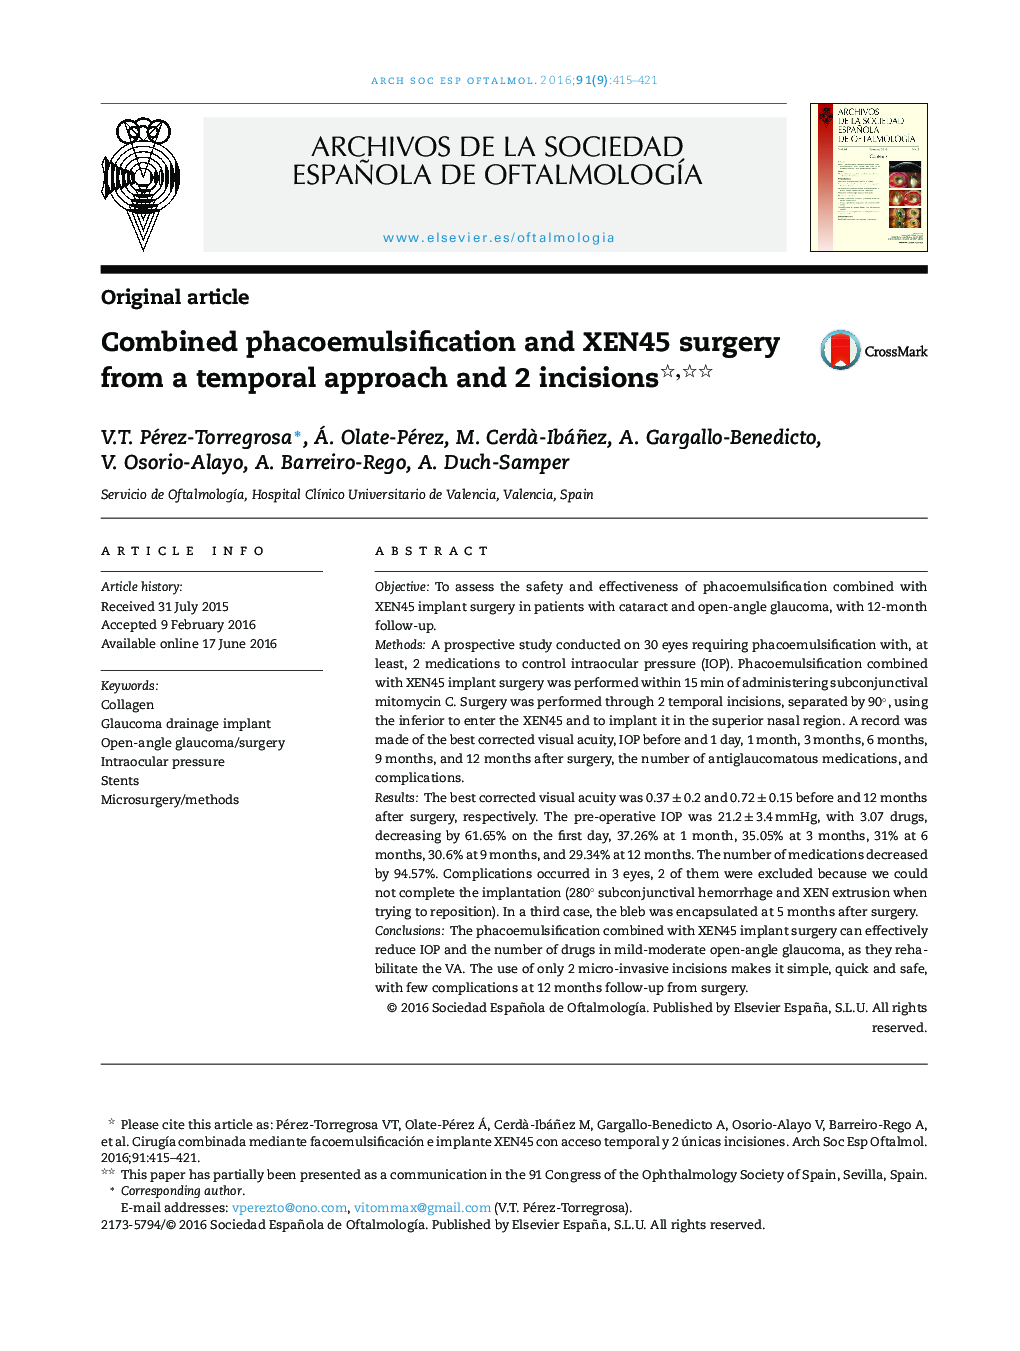 Combined phacoemulsification and XEN45 surgery from a temporal approach and 2 incisions 